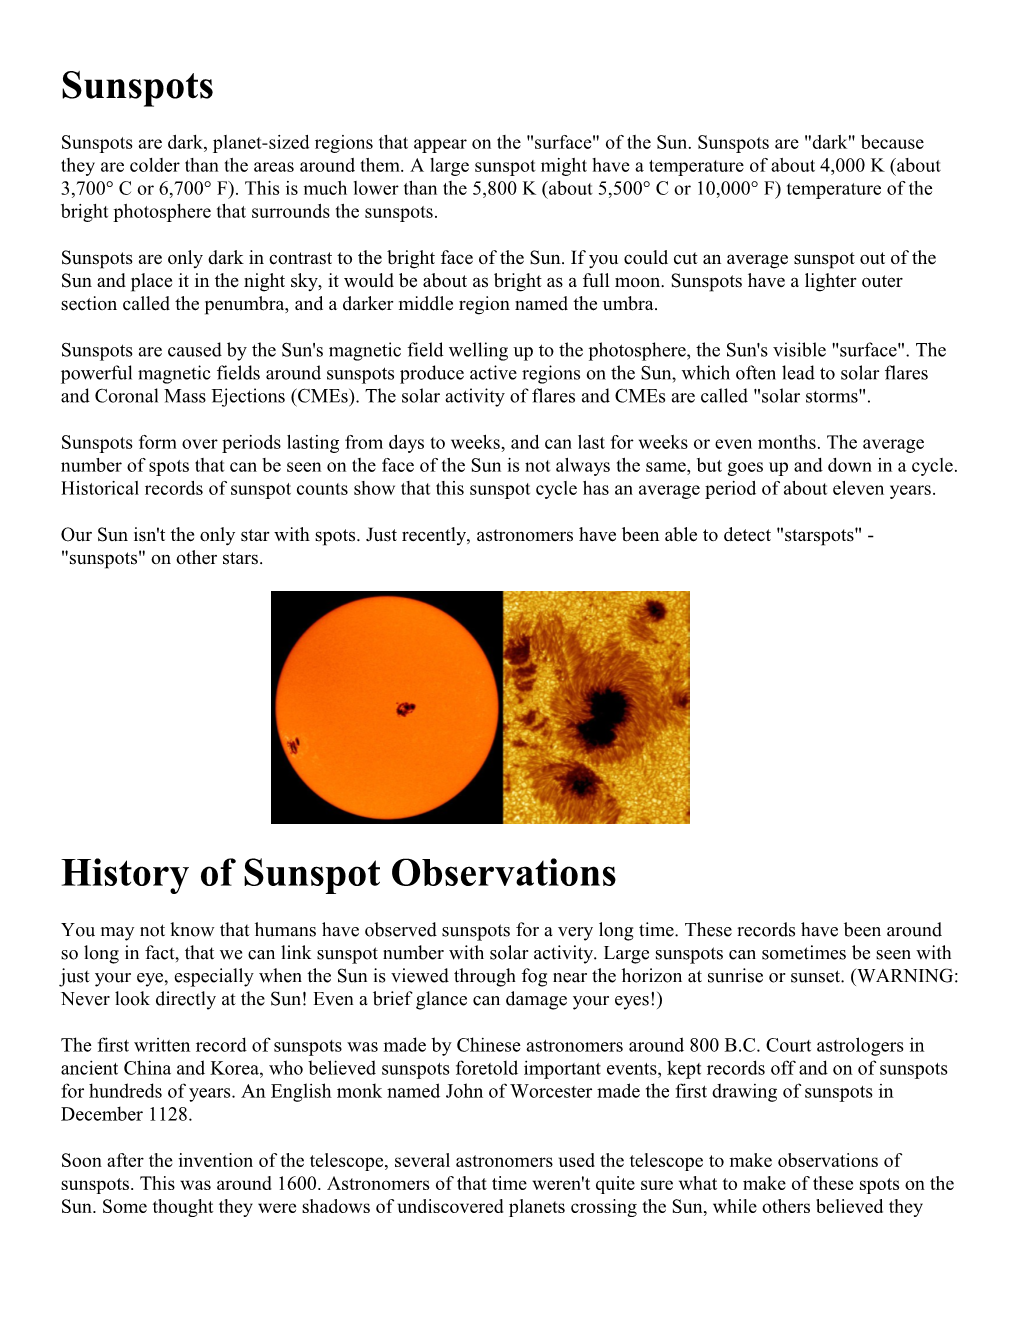 Sunspots Are Dark, Planet-Sized Regions That Appear on the Surface of the Sun. Sunspots